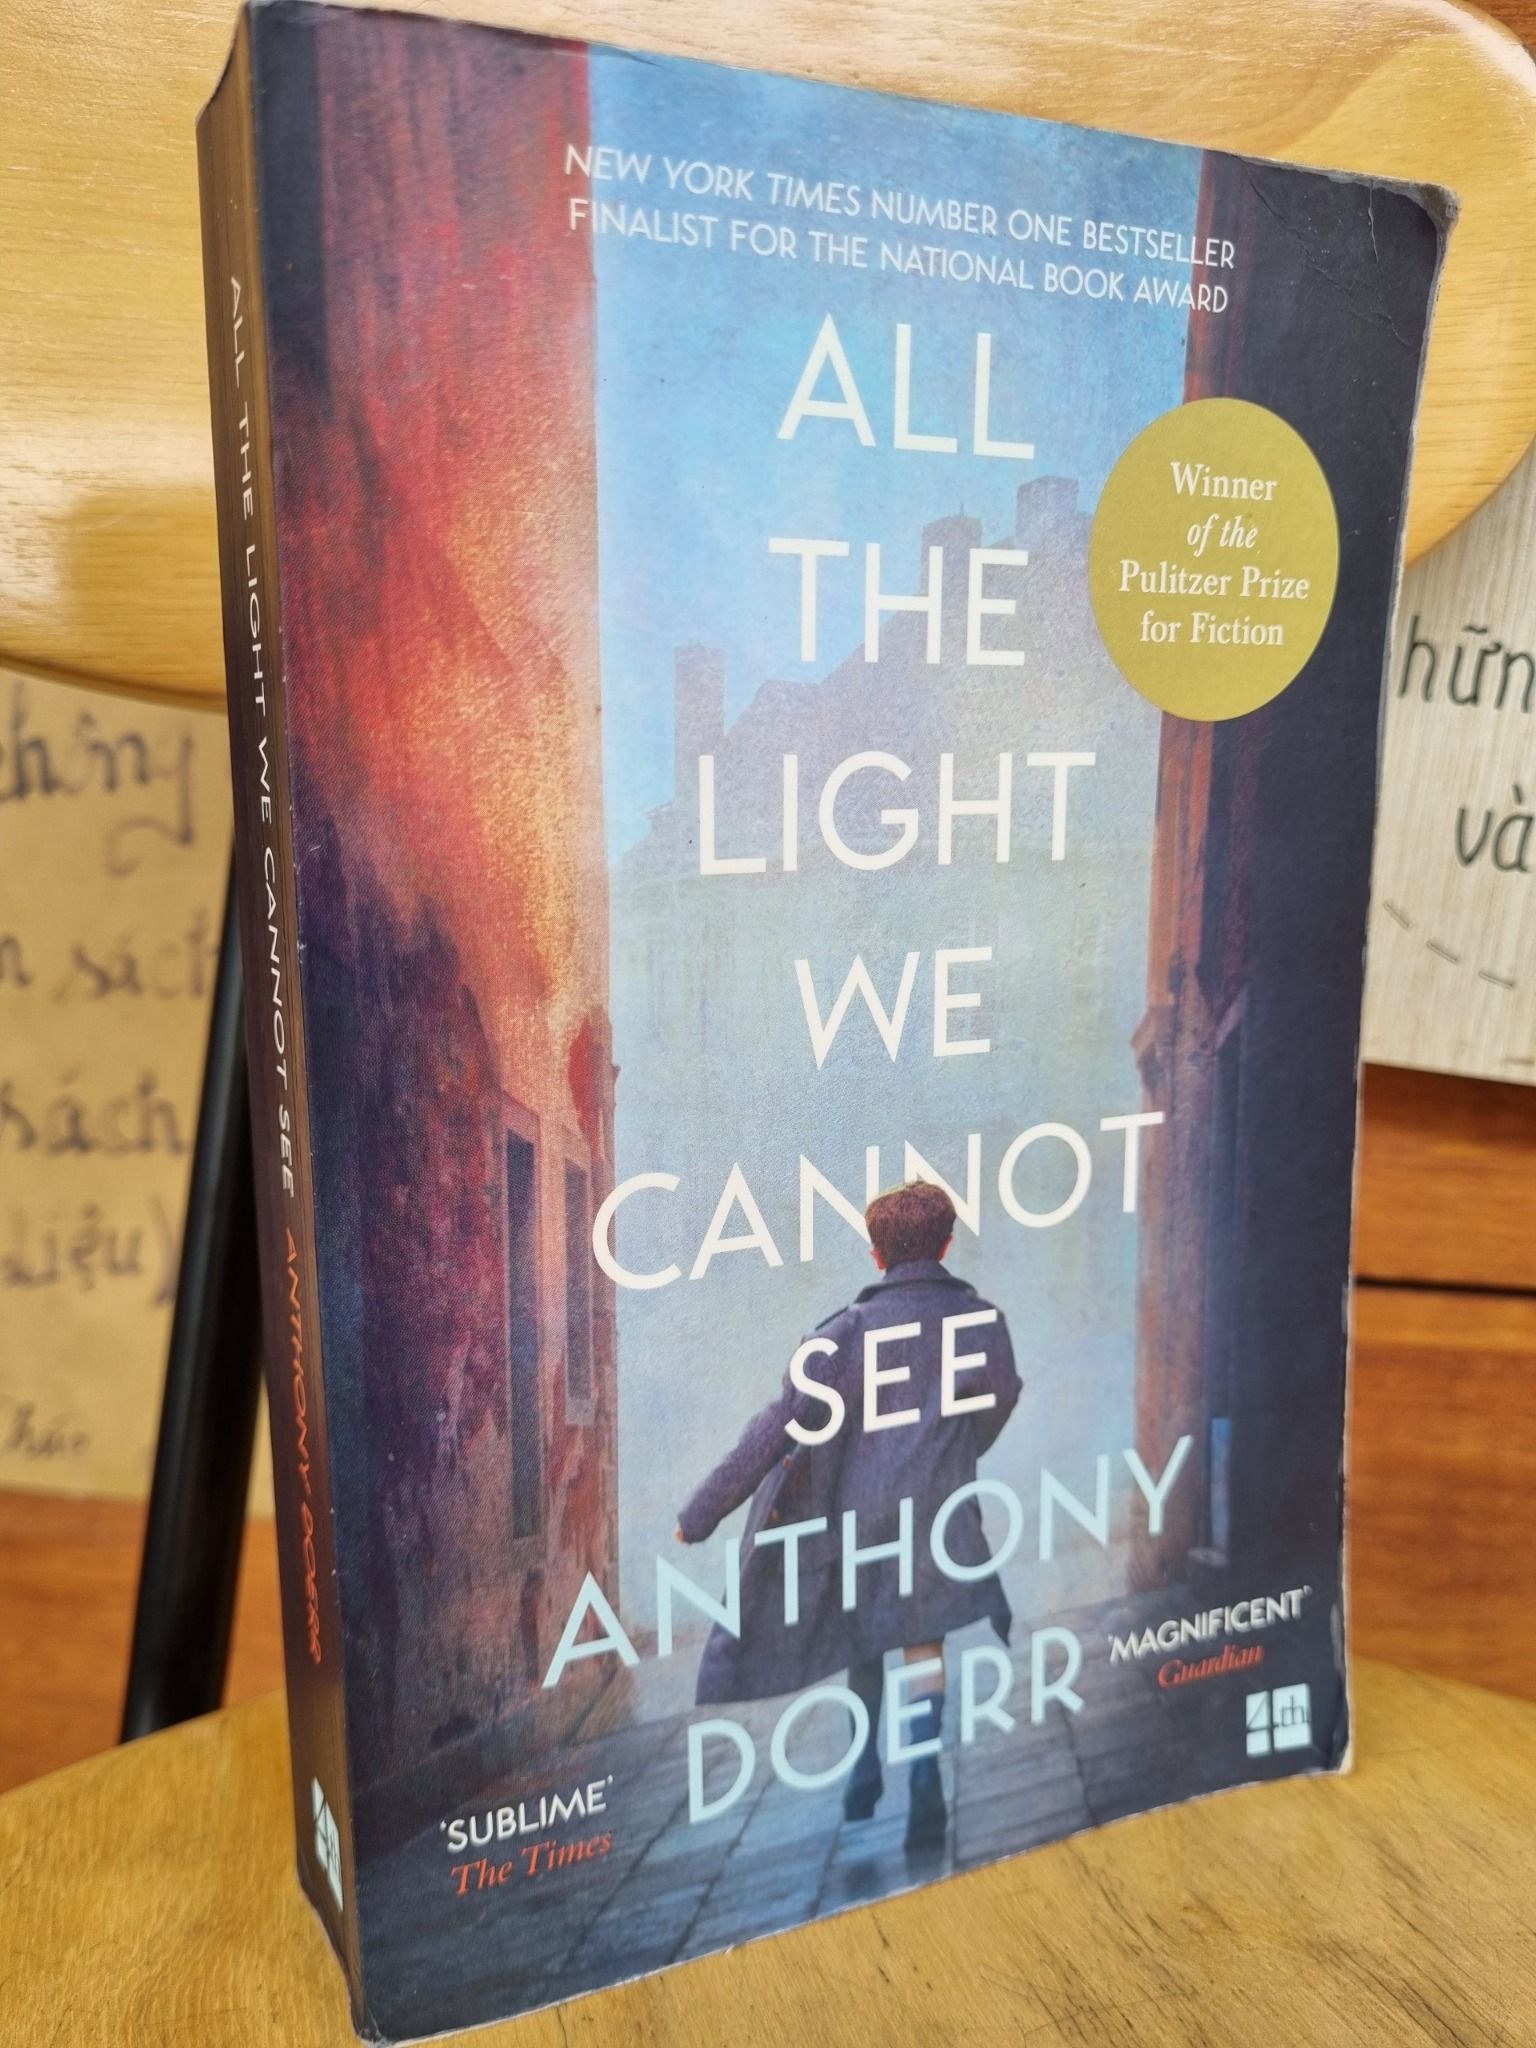  ALL THE LIGHT WE CANNOT SEE - ANTHONY DOERR - WINNER OF THE PULITZER PRIZE FOR FICTION 